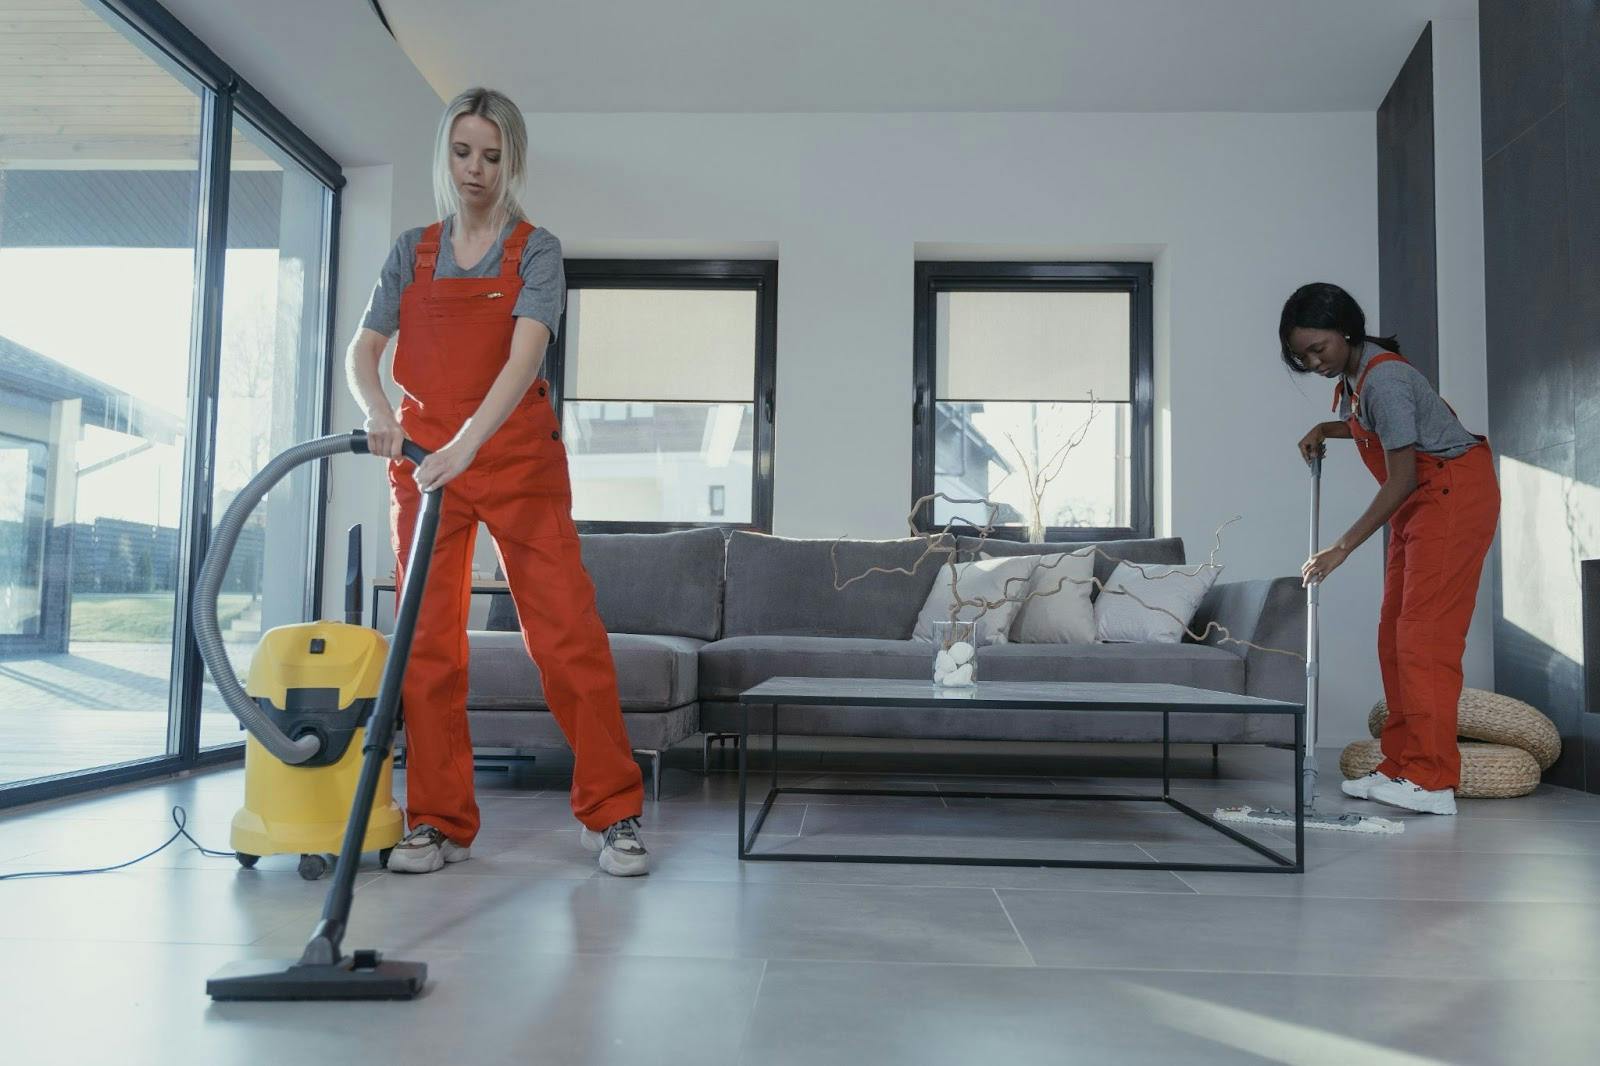 Two women cleaning the floor